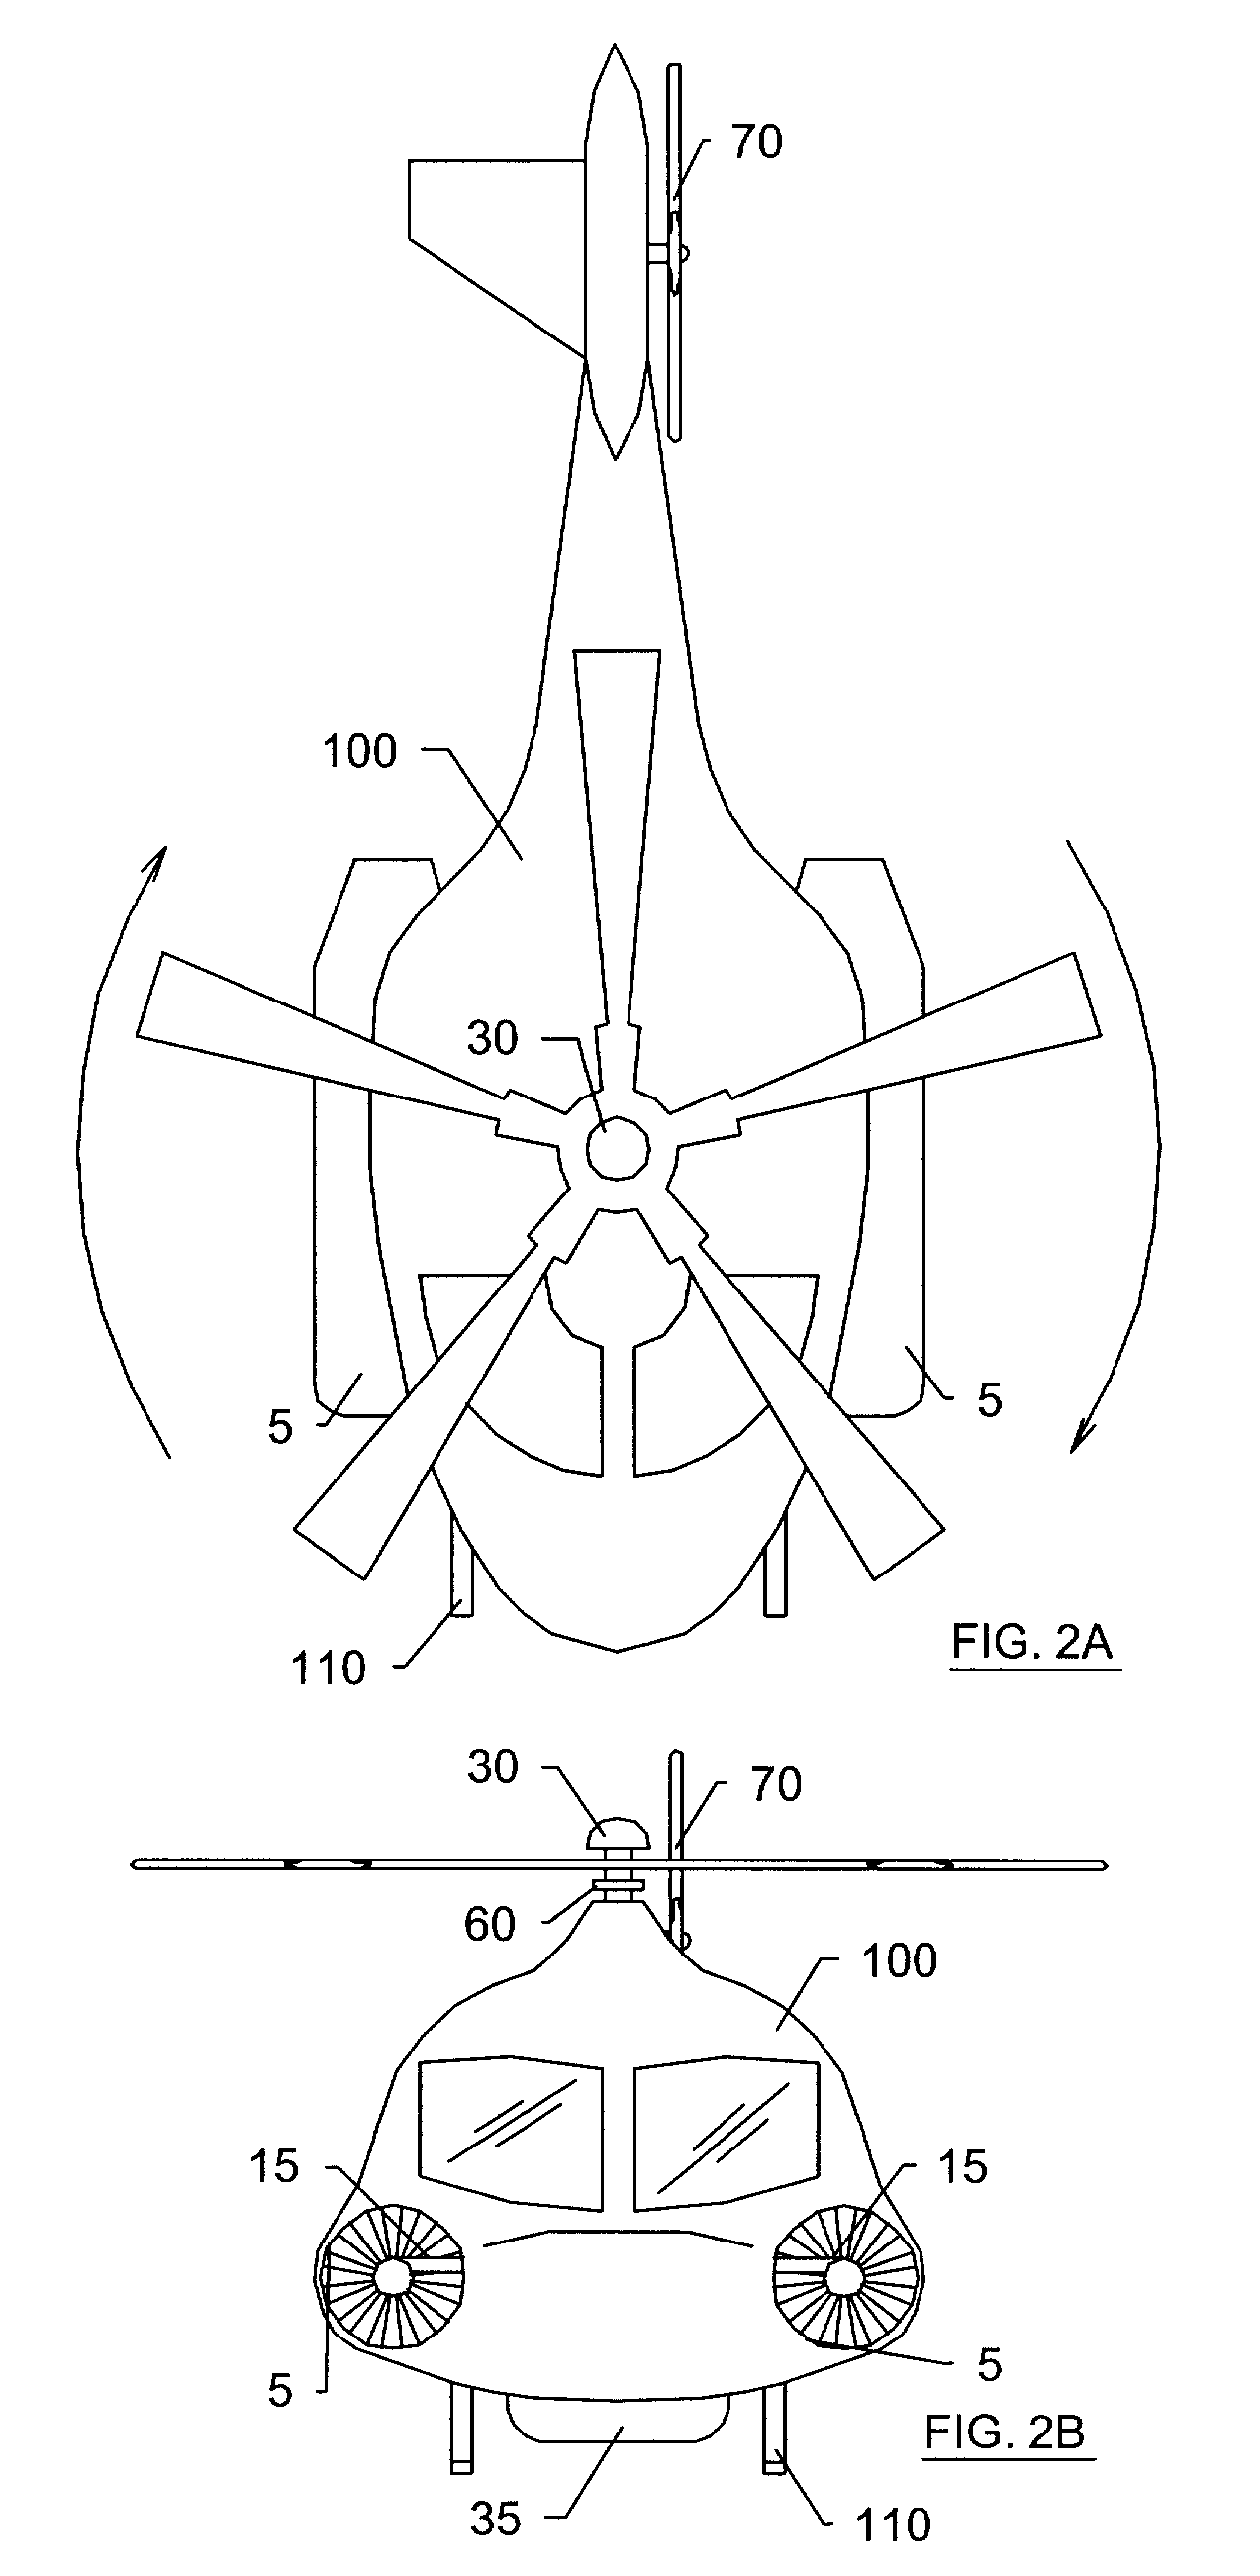 Aircraft using turbo-electric hybrid propulsion system